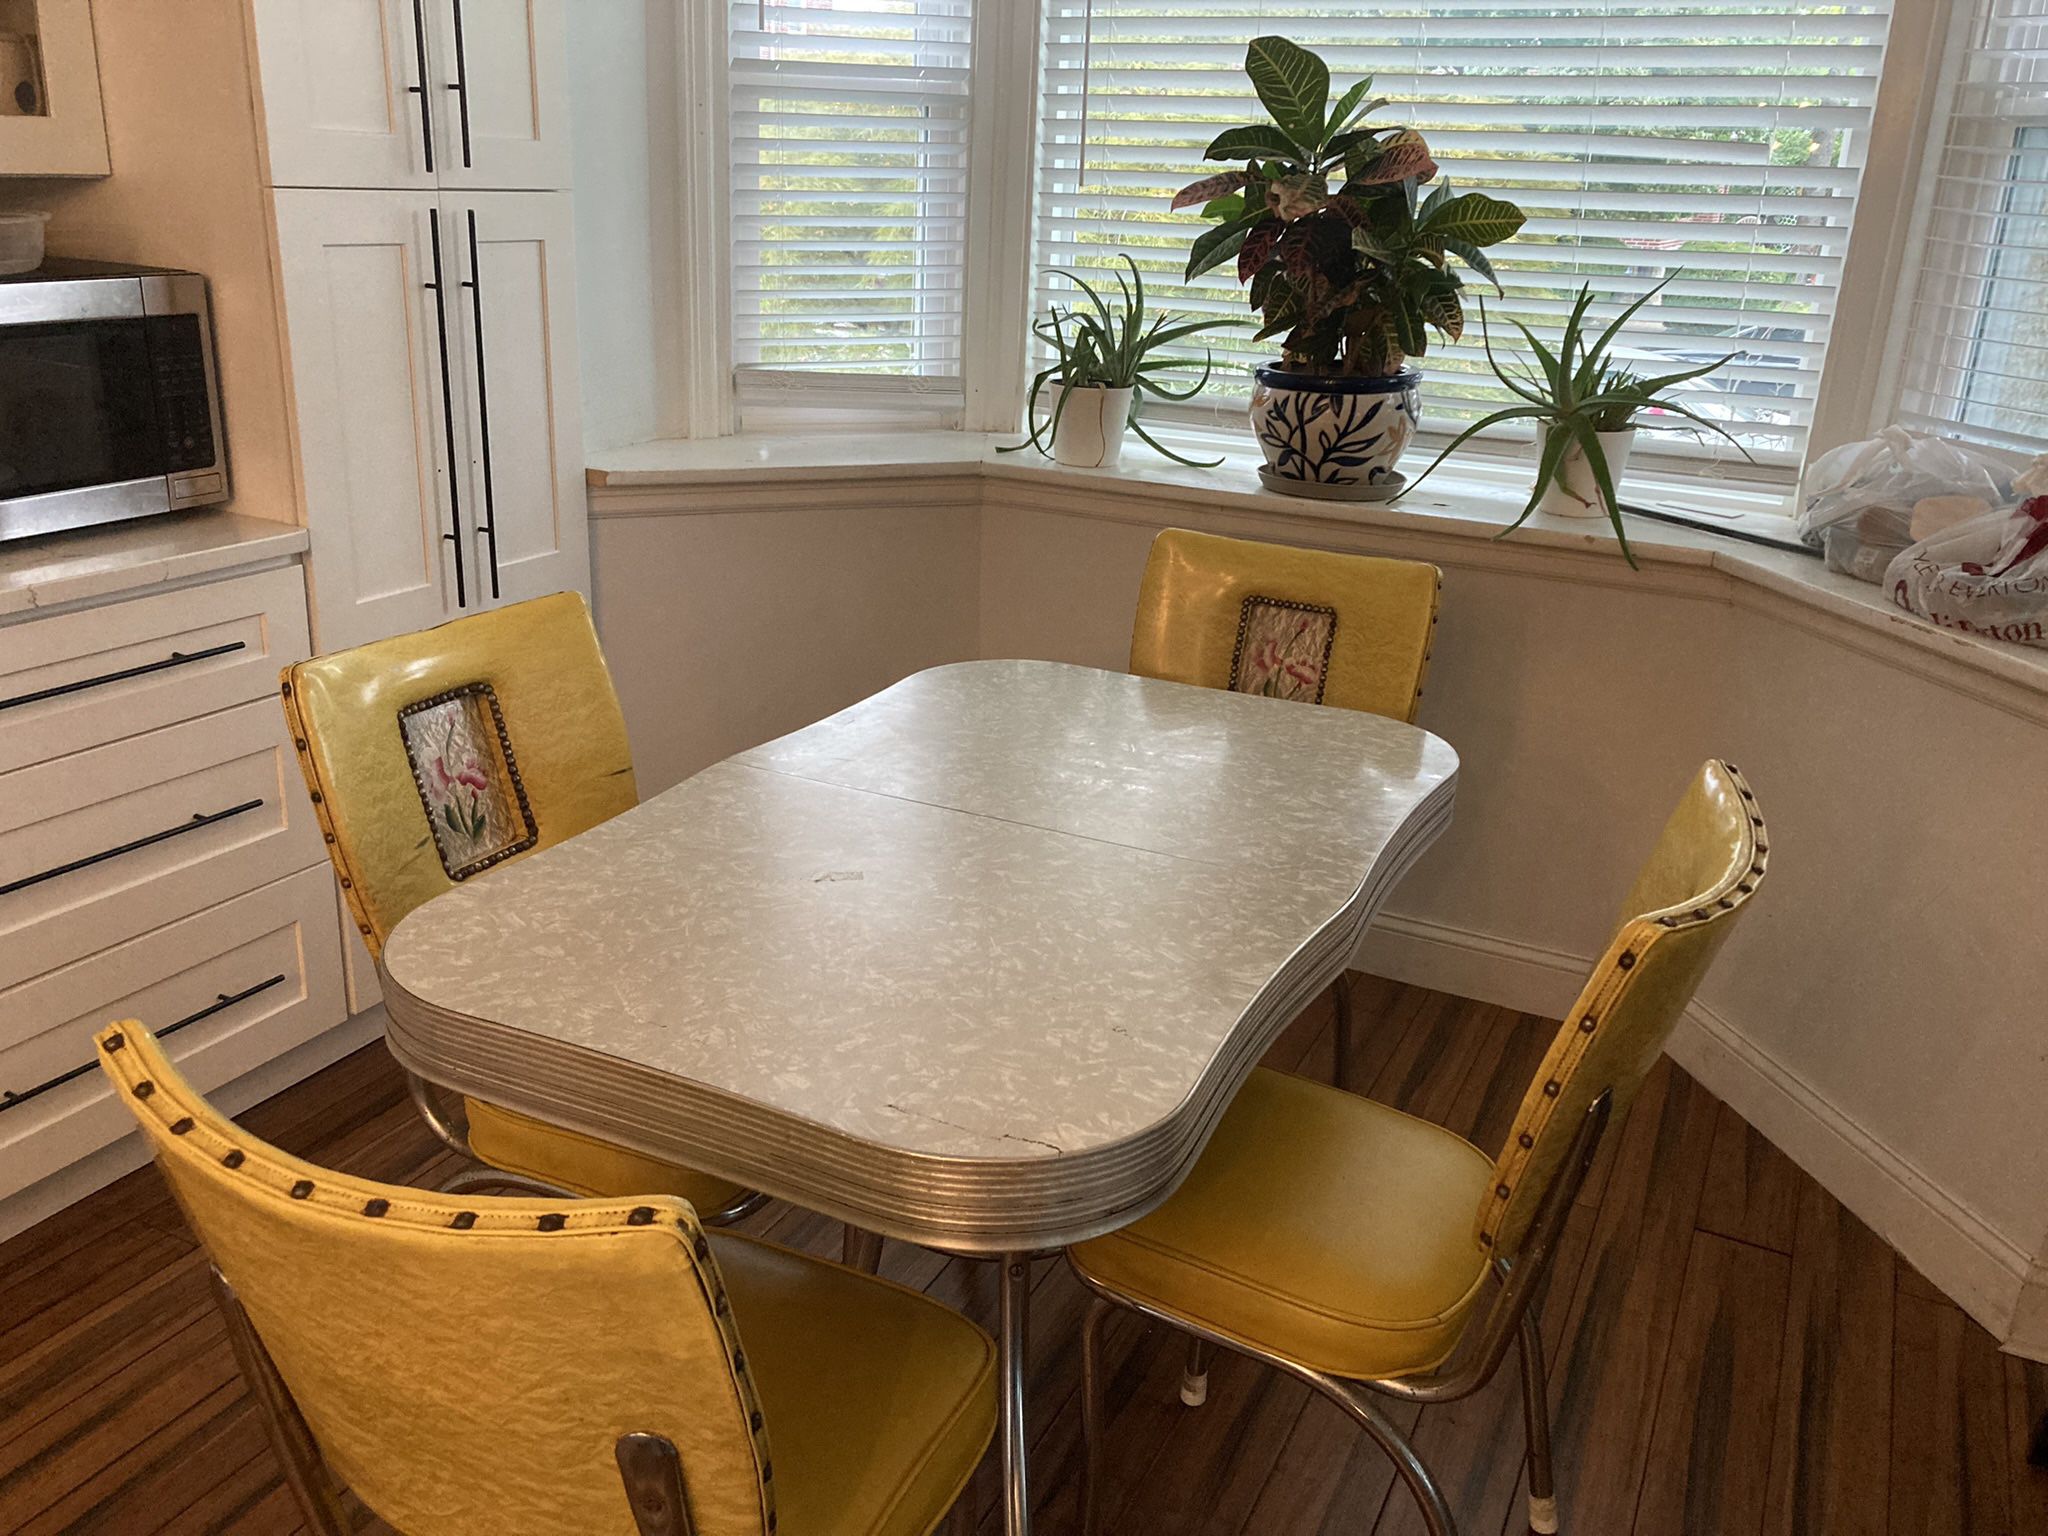 Vintage Dining Table And Chairs